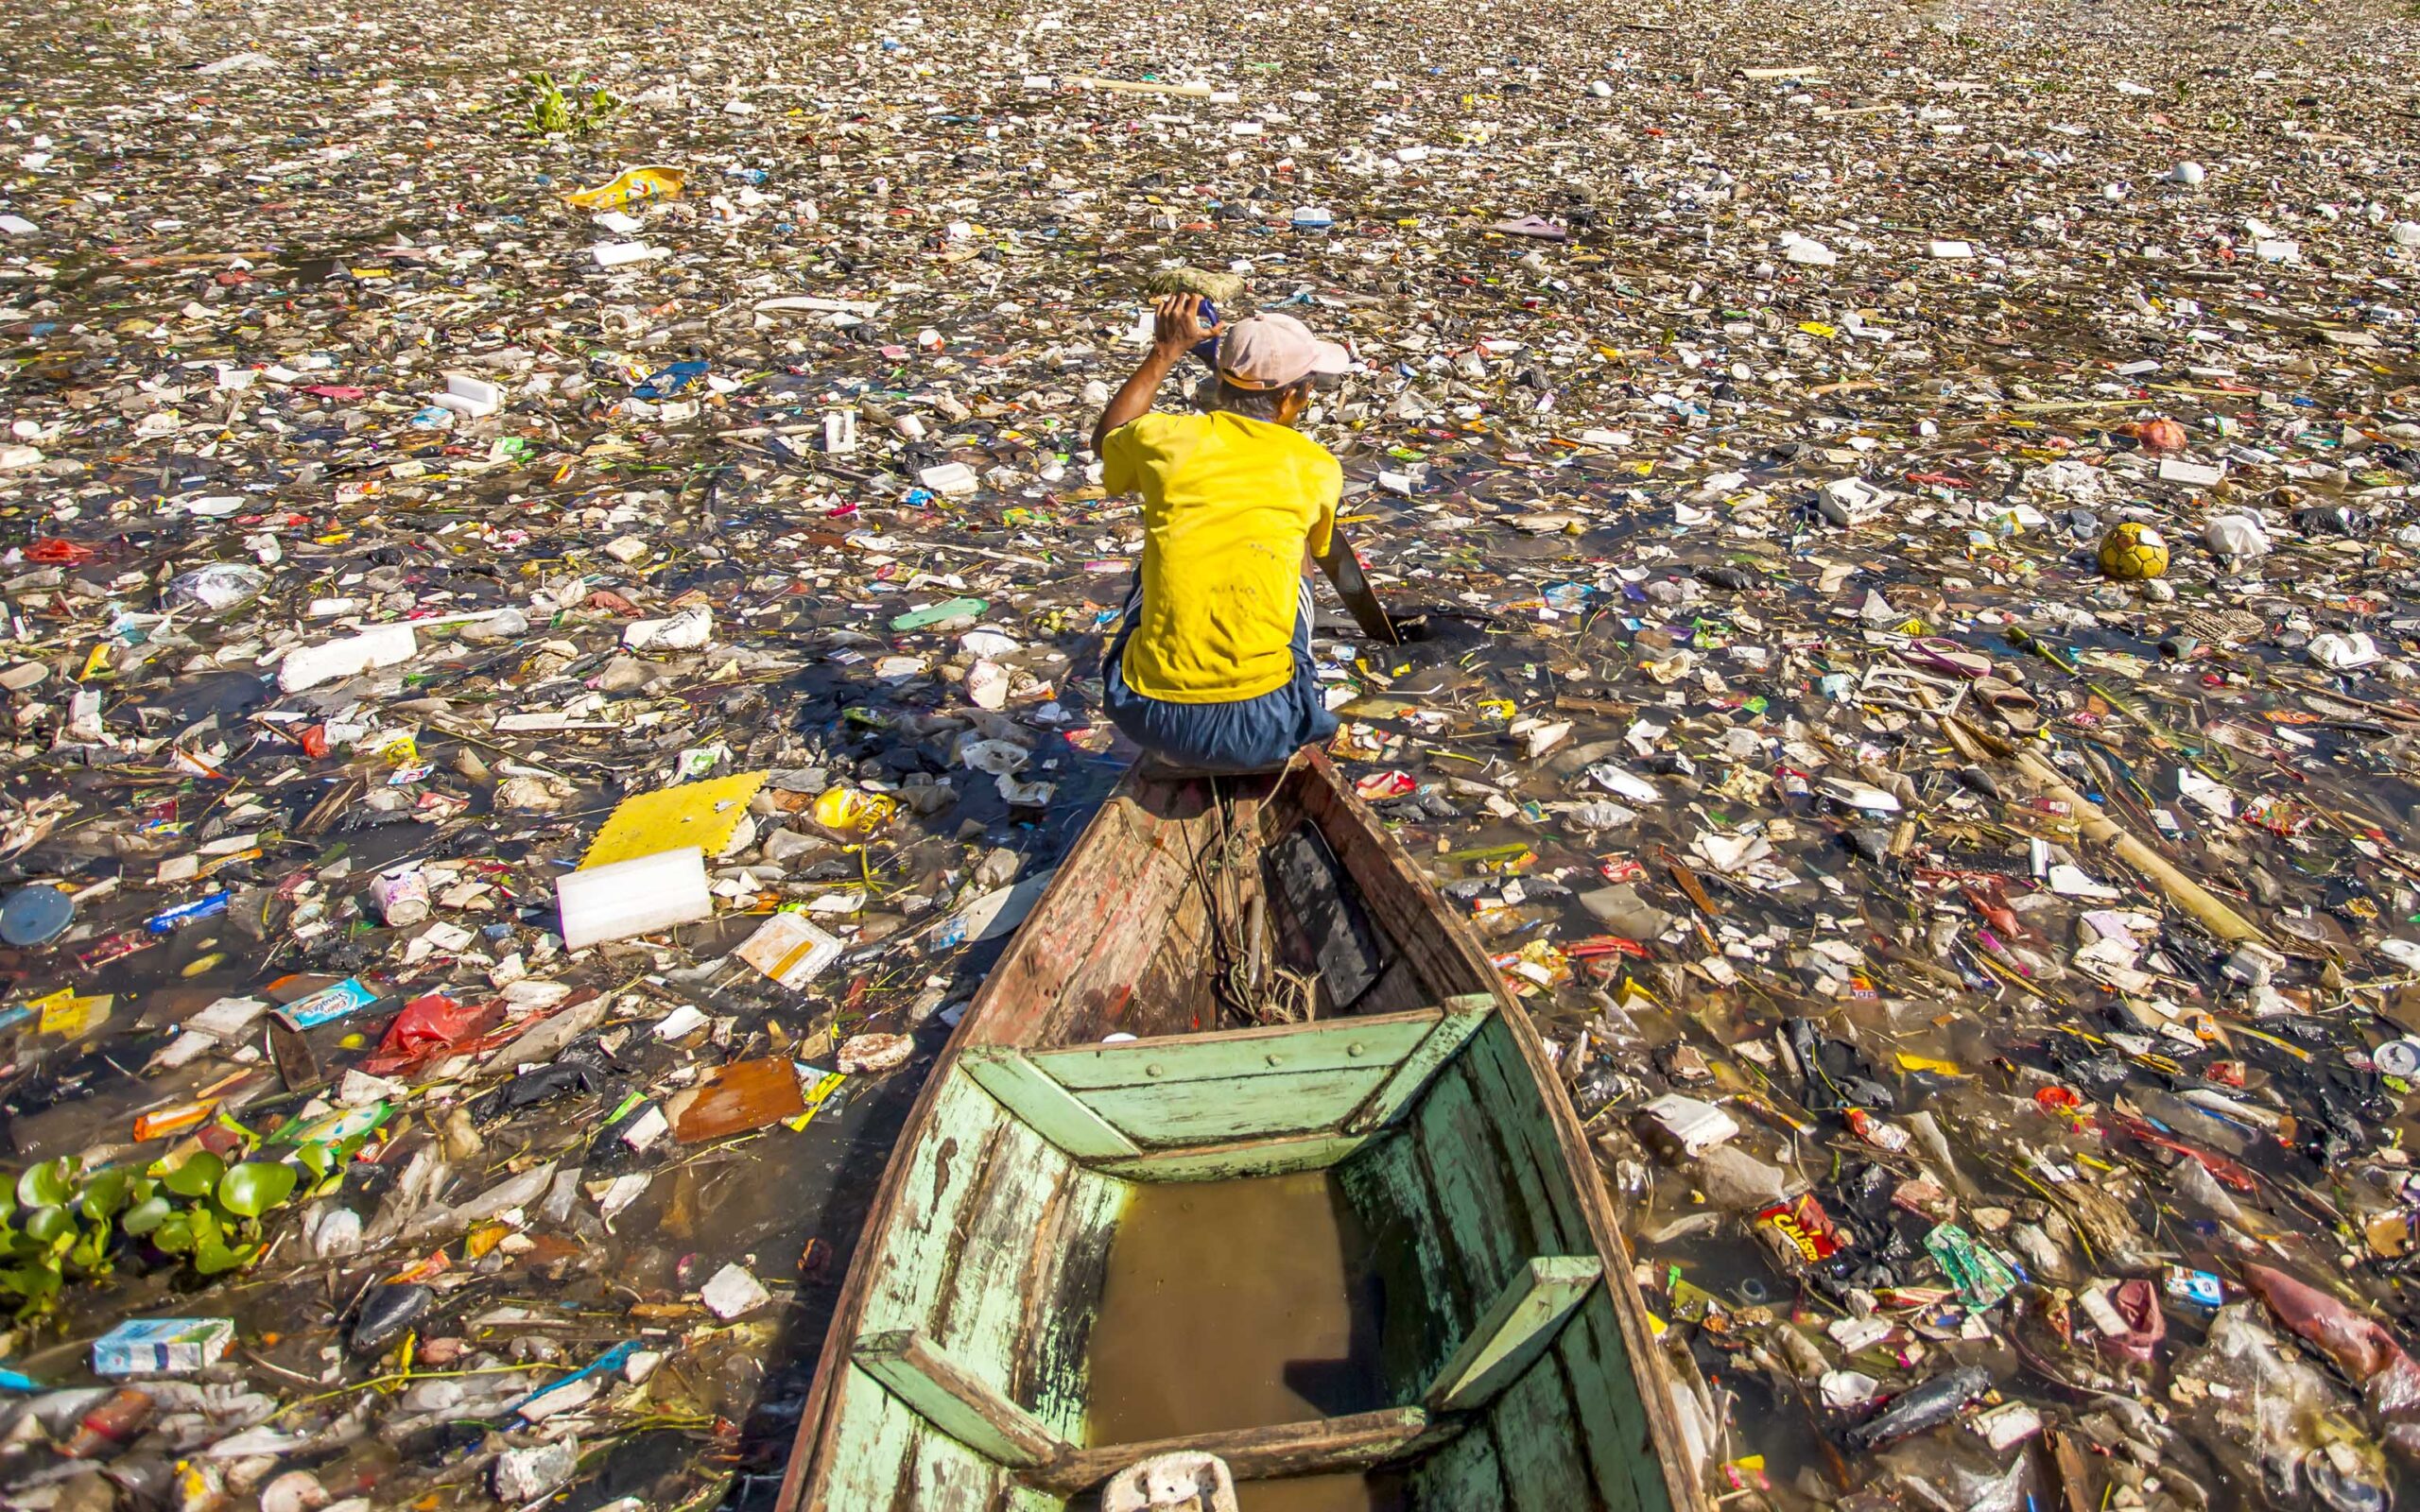 Researchers estimate that Indonesians eat about 15 grams of microplastics per month, with the majority of plastic particles coming from aquatic sources such as seafood.